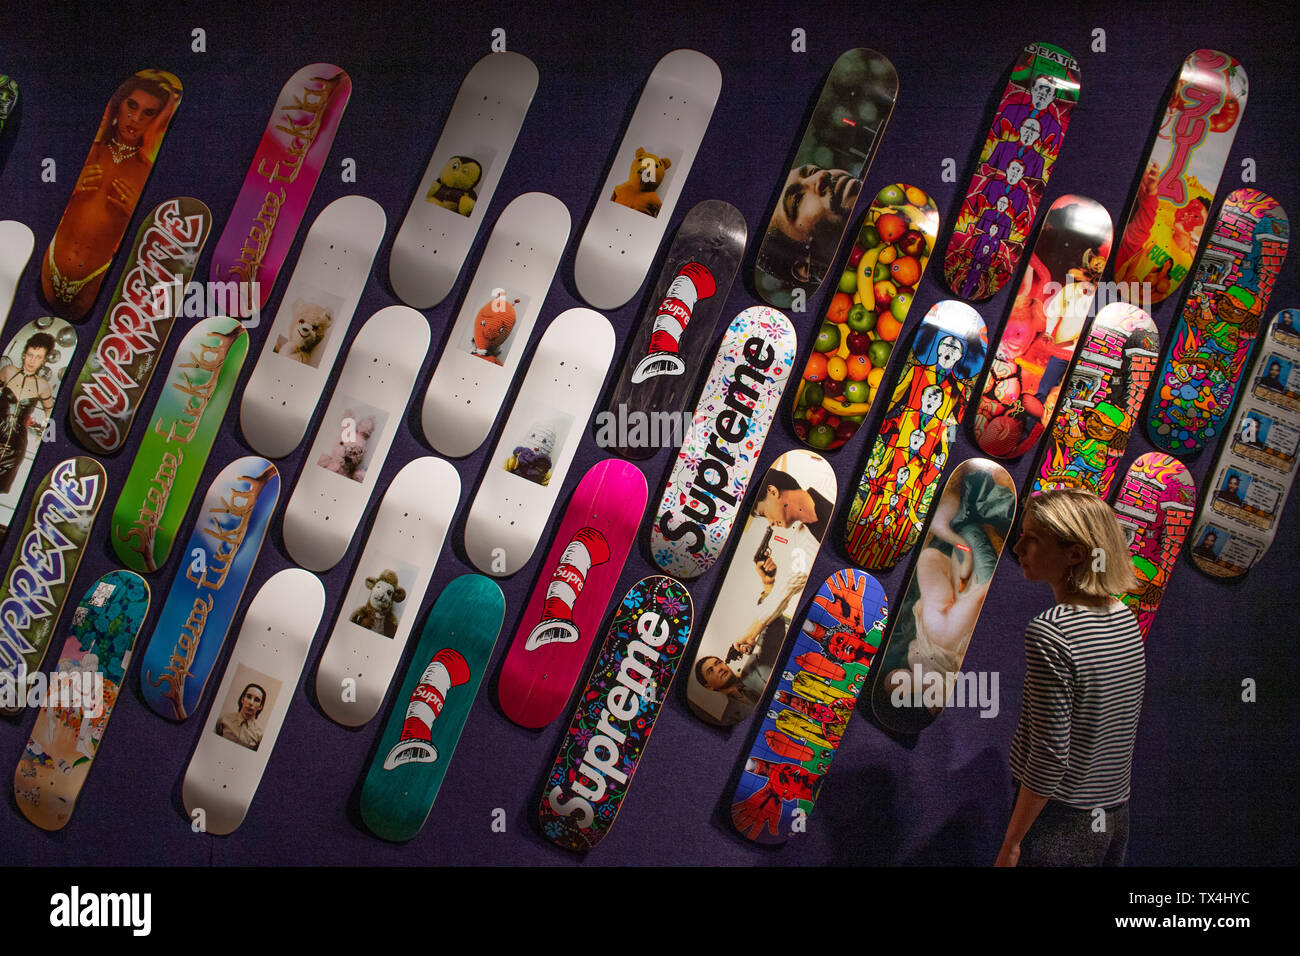 The Entire Supreme Skate Deck Collection Is About To Be Auctioned